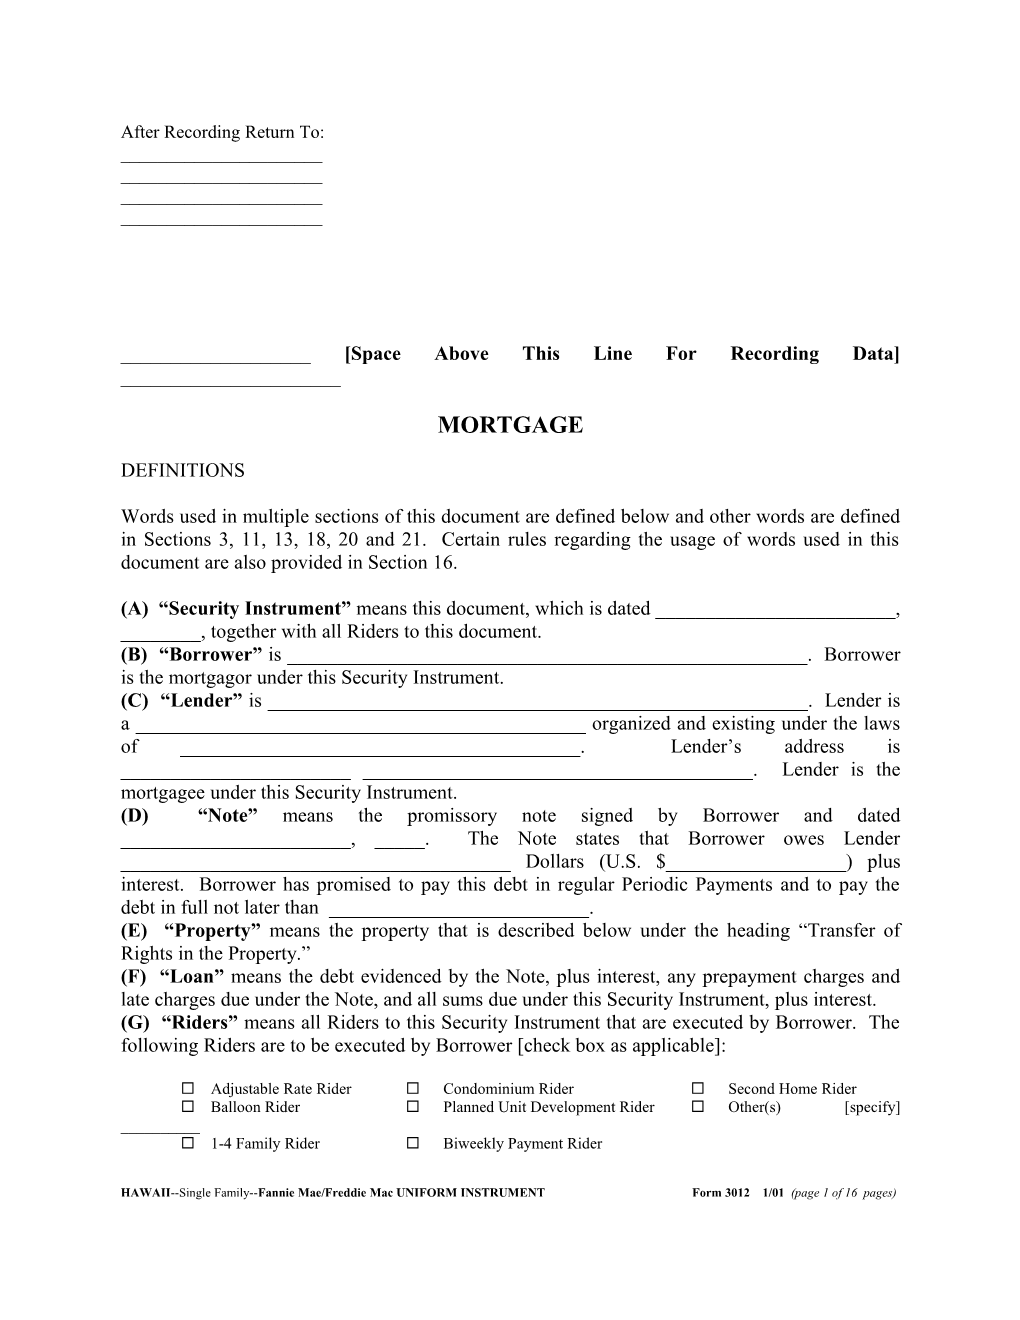 Hawaii Security Instrument (Form 3012): Word